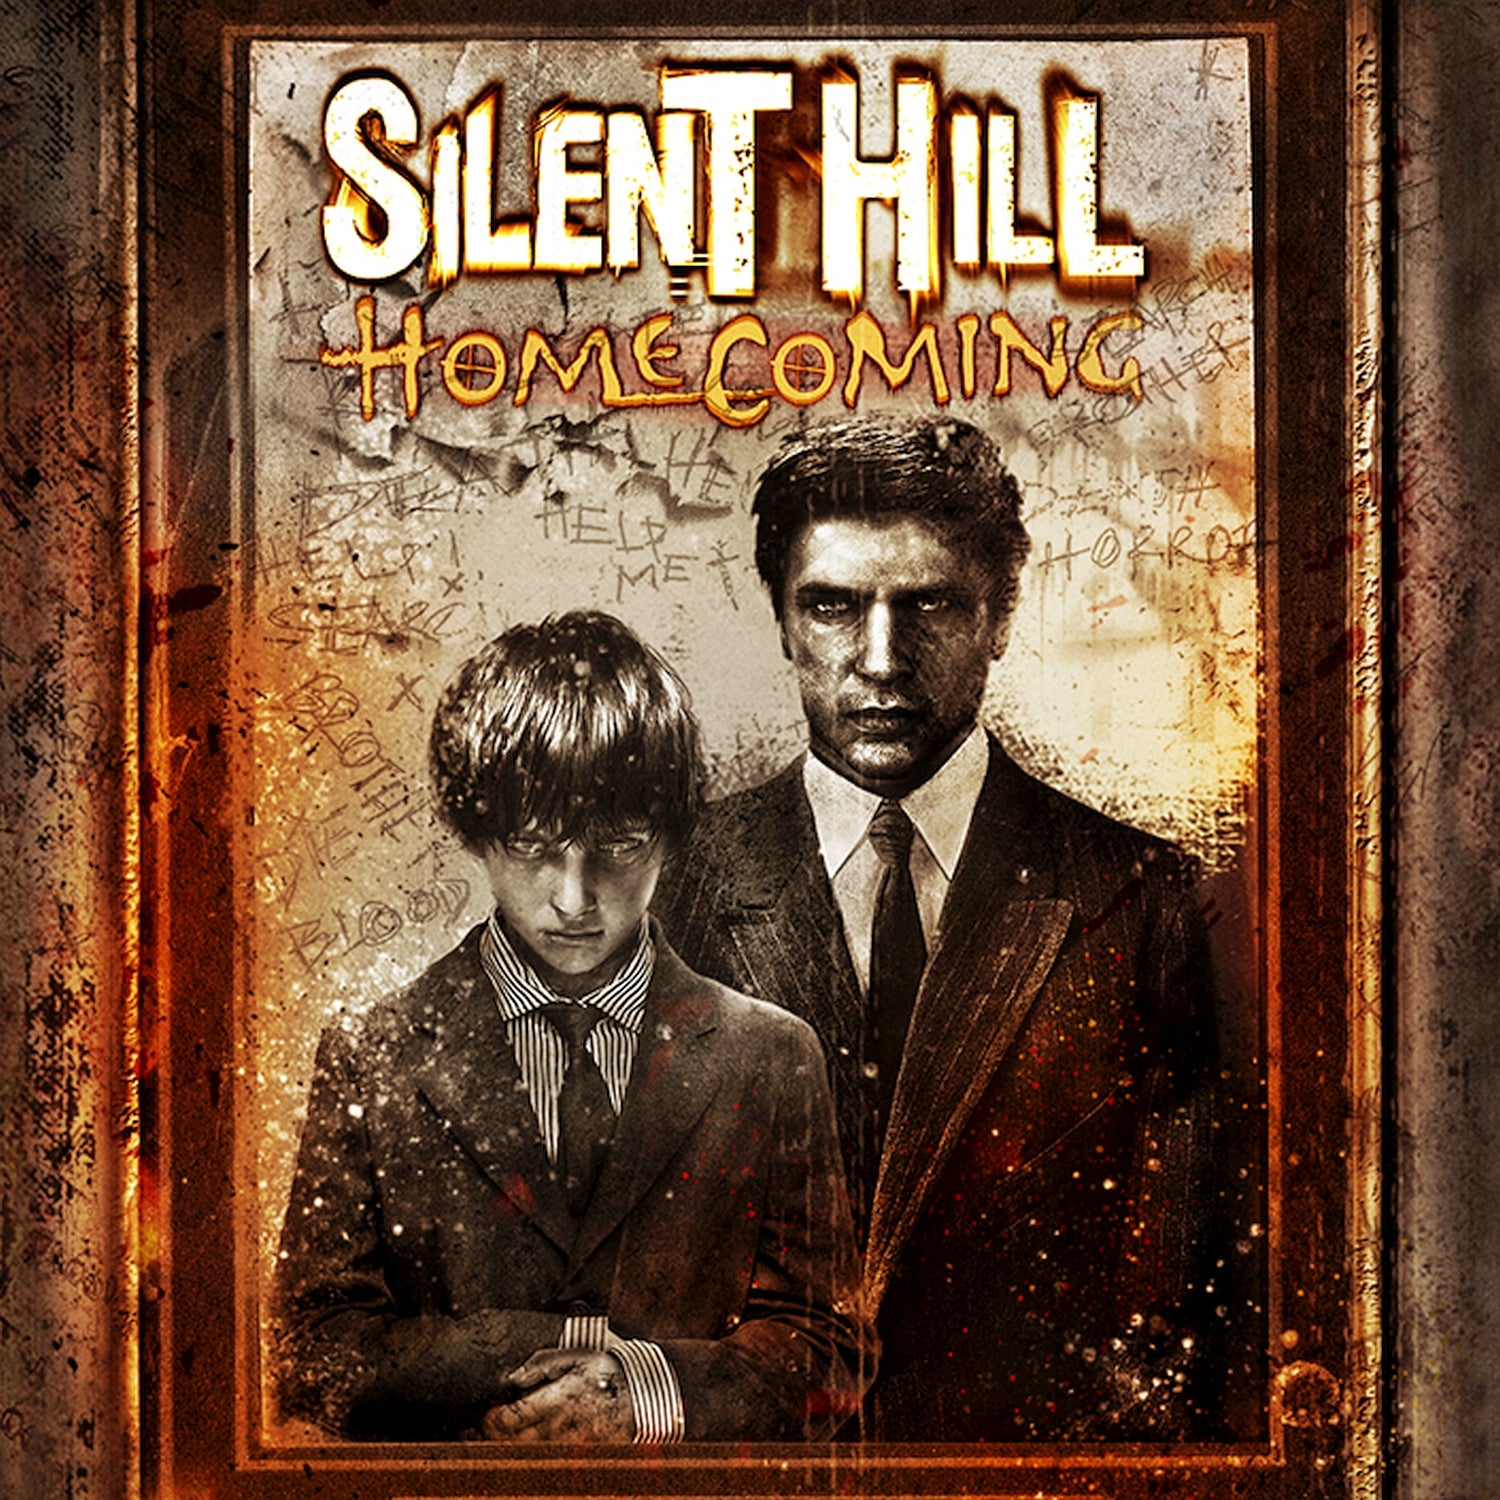 dave addleman recommends silent hill homecoming walkthrough pic